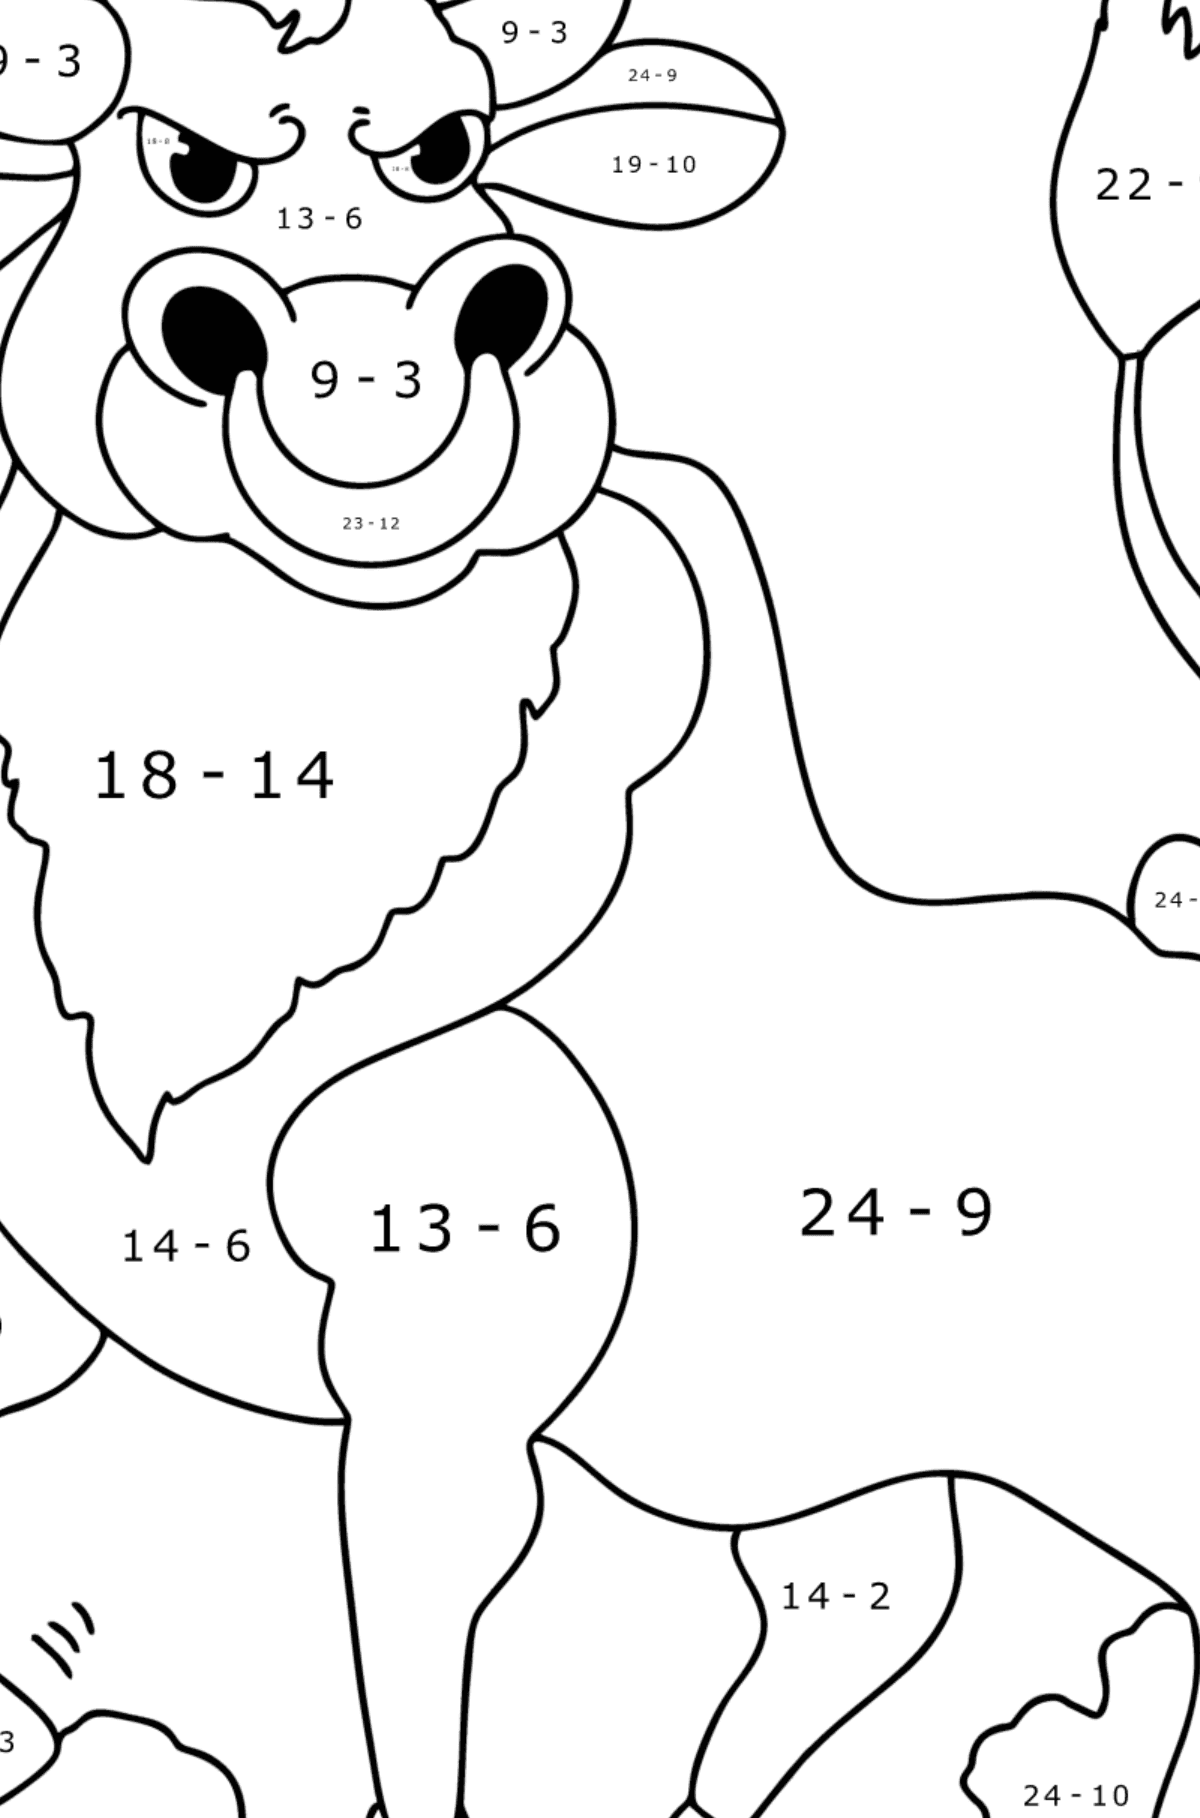 Brave bull Coloring page - Math Coloring - Subtraction for Kids